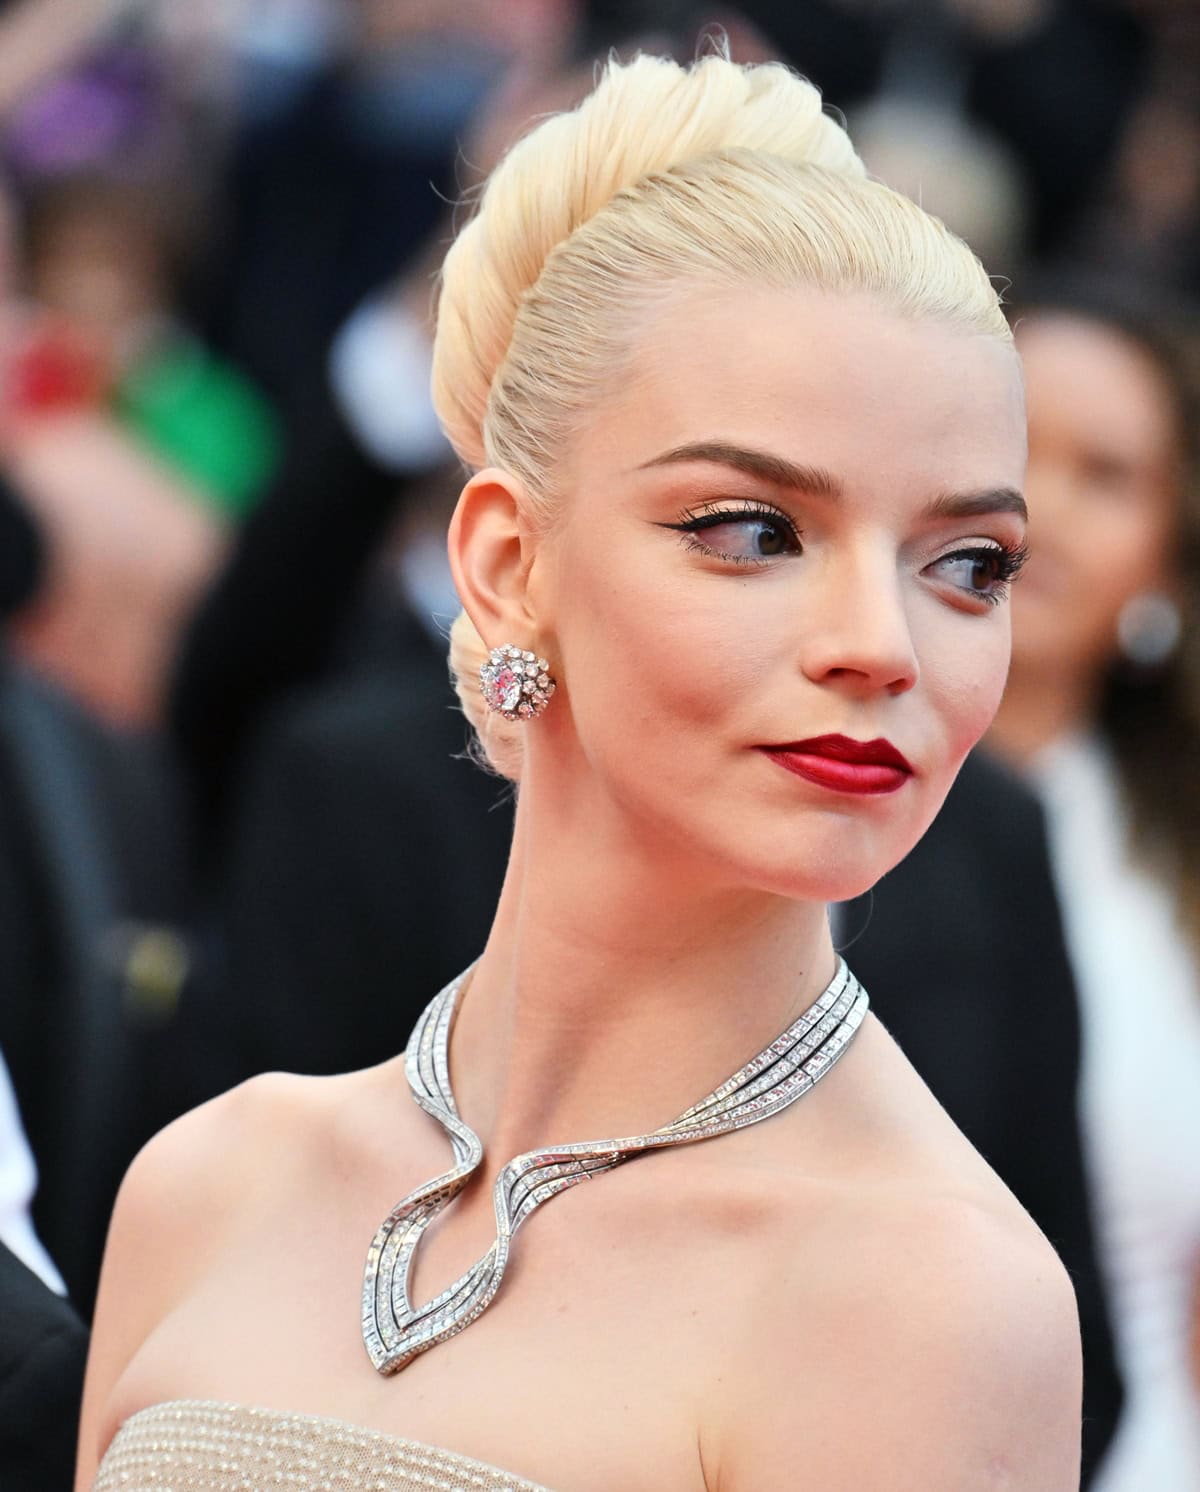 Anya Taylor-Joy's red carpet look was elevated by layers of Tiffany & Co. jewelry, including a dazzling diamond statement necklace and elegant platinum rings styled by Ryan Hastings